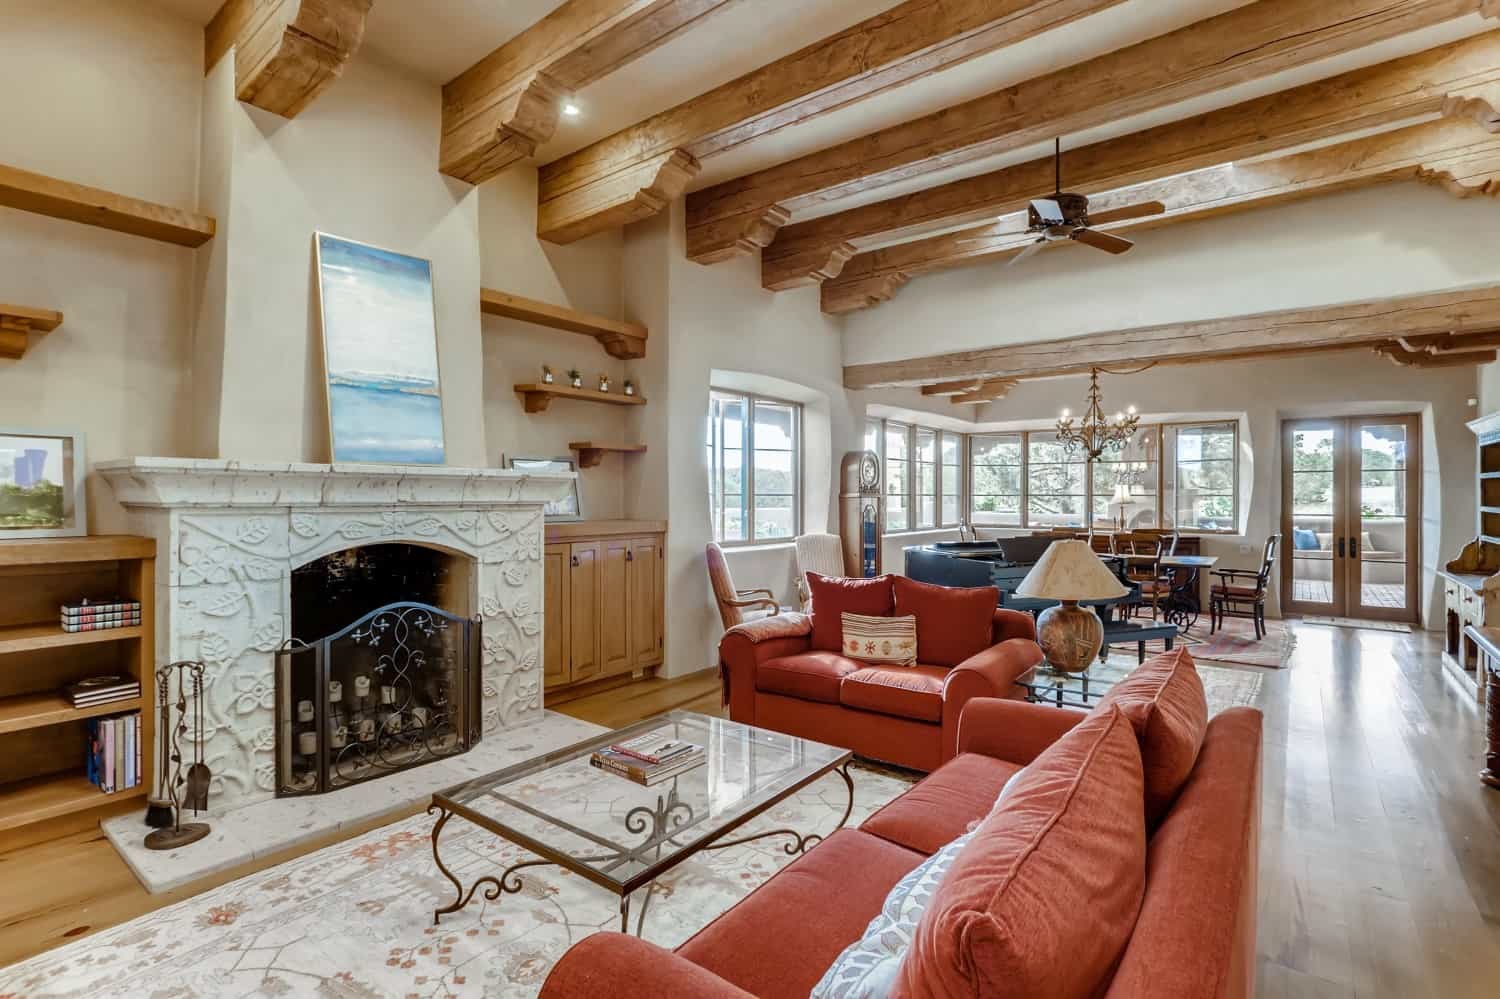 Enjoy a cozy pinon-wood fire in the spacious living room